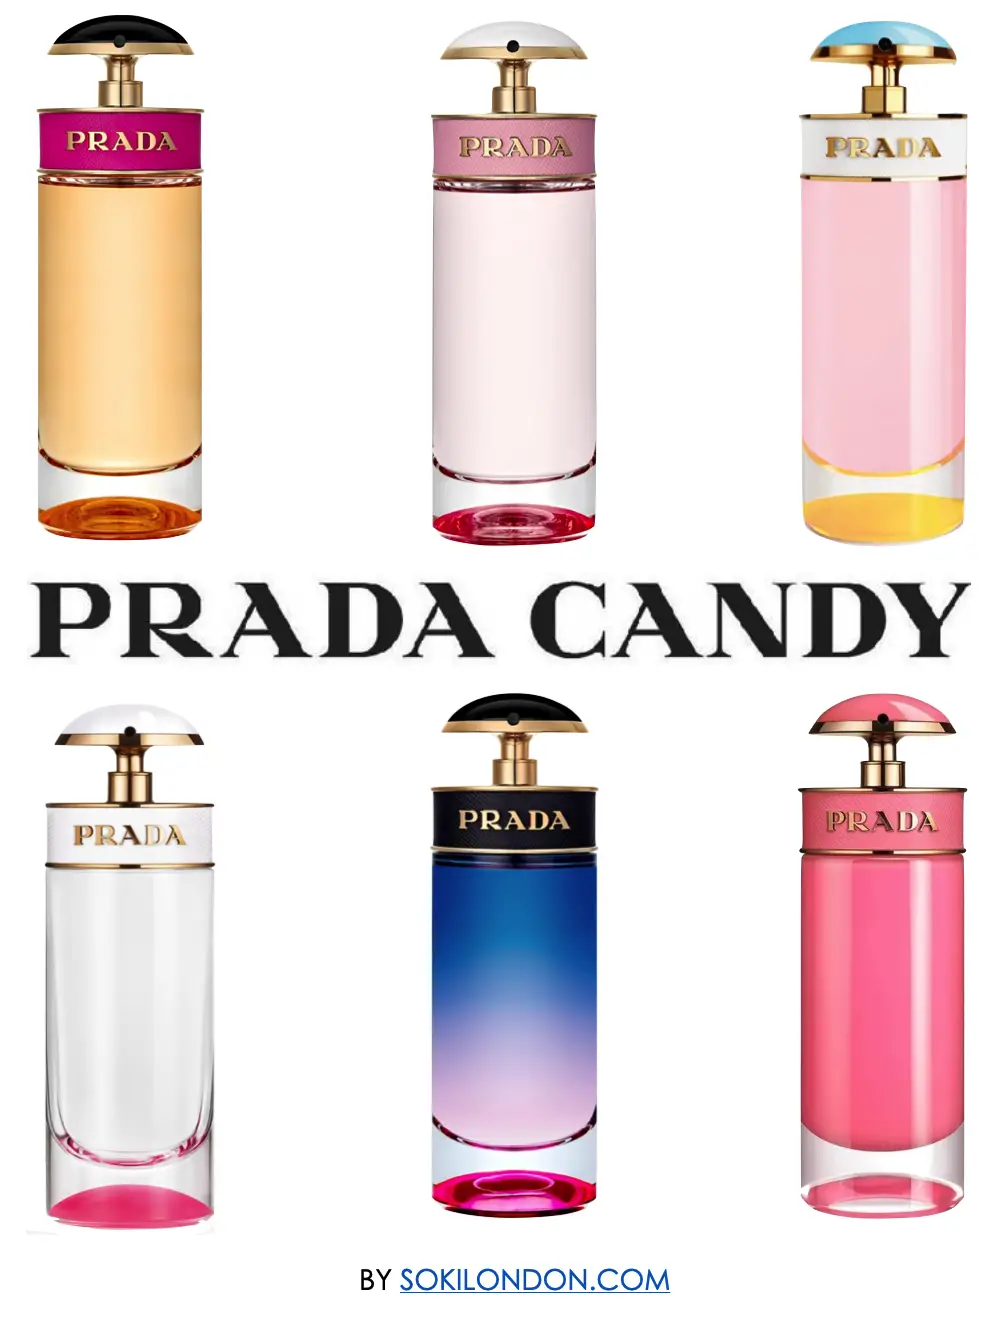 The Ultimate Guide To The Prada Candy Perfumes